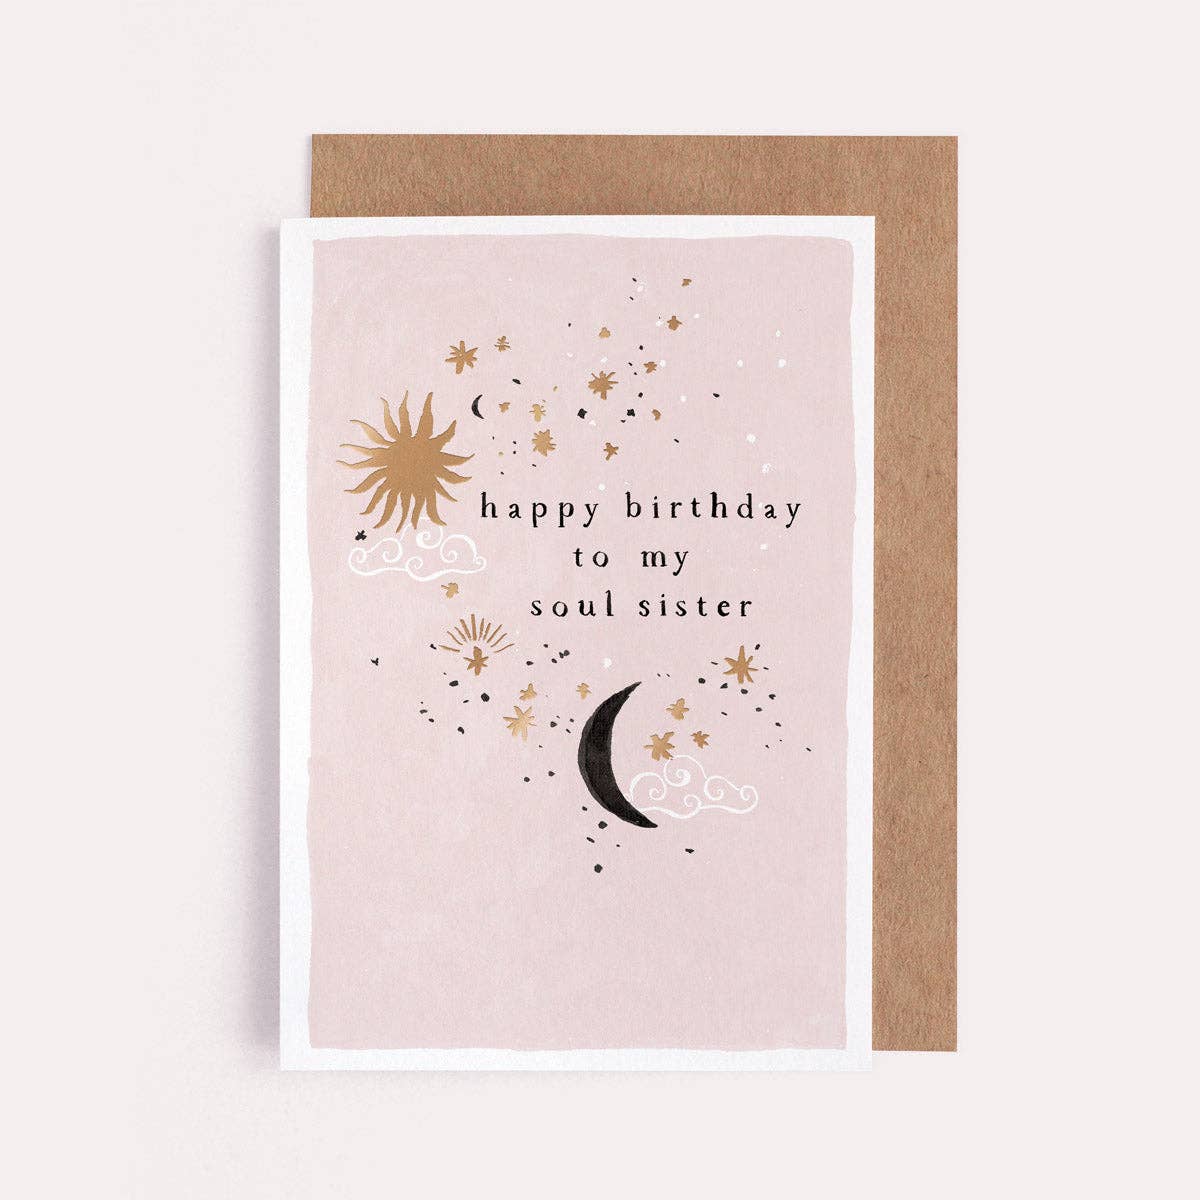 Soul Sister Birthday Card By Sister Paper Co.